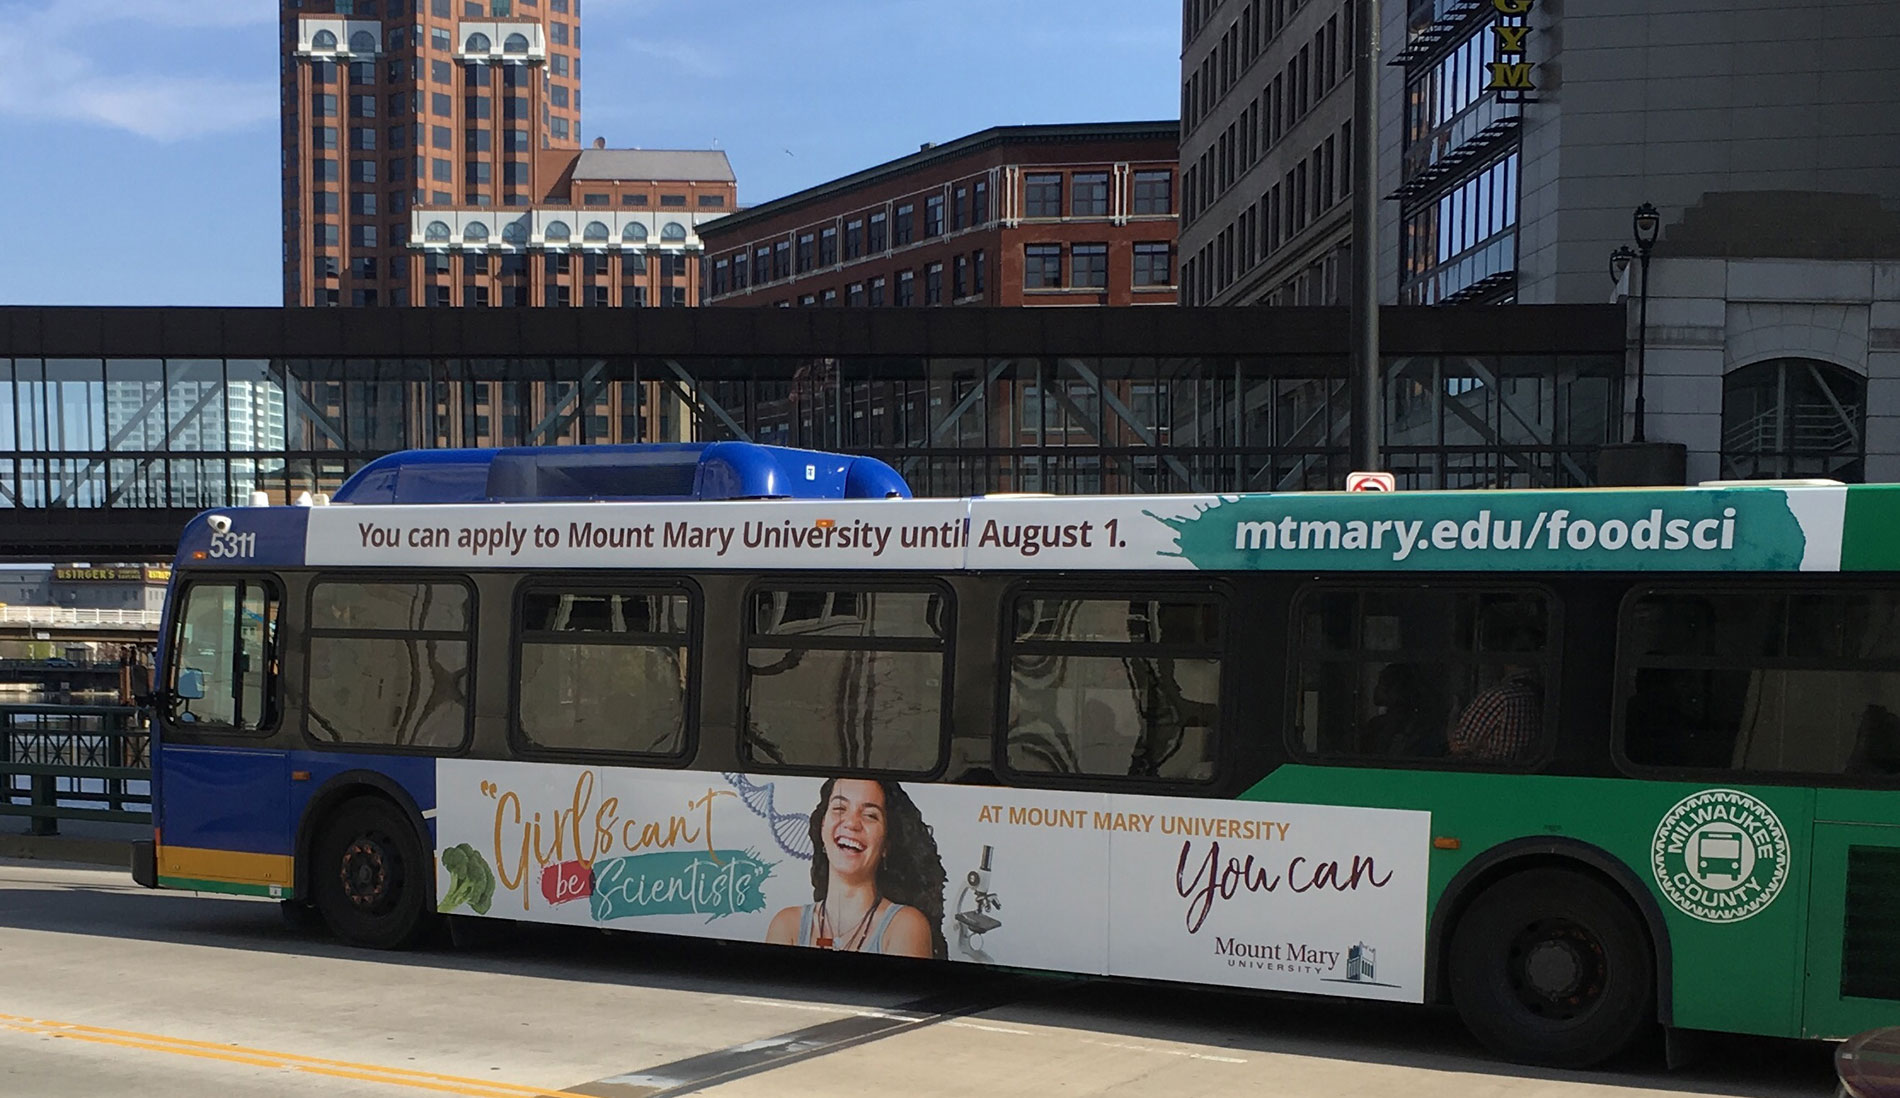 Campaign ad shown on a bus in downtown Milwaukee